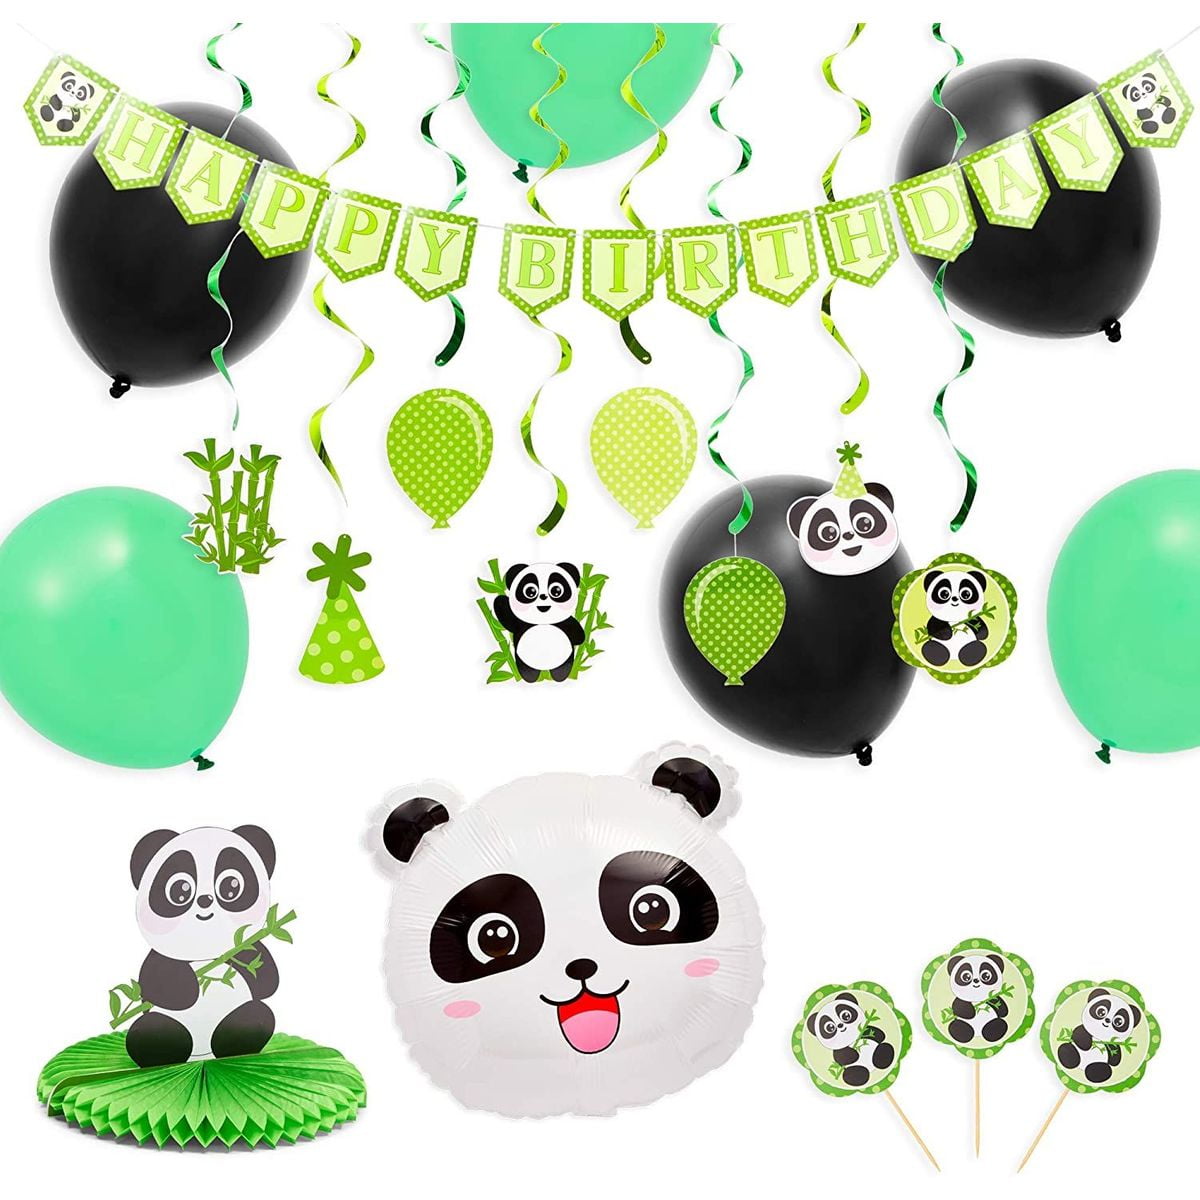 Panda 20 BIRTHDAY BANNERS x 2-Party Decorations-with any name